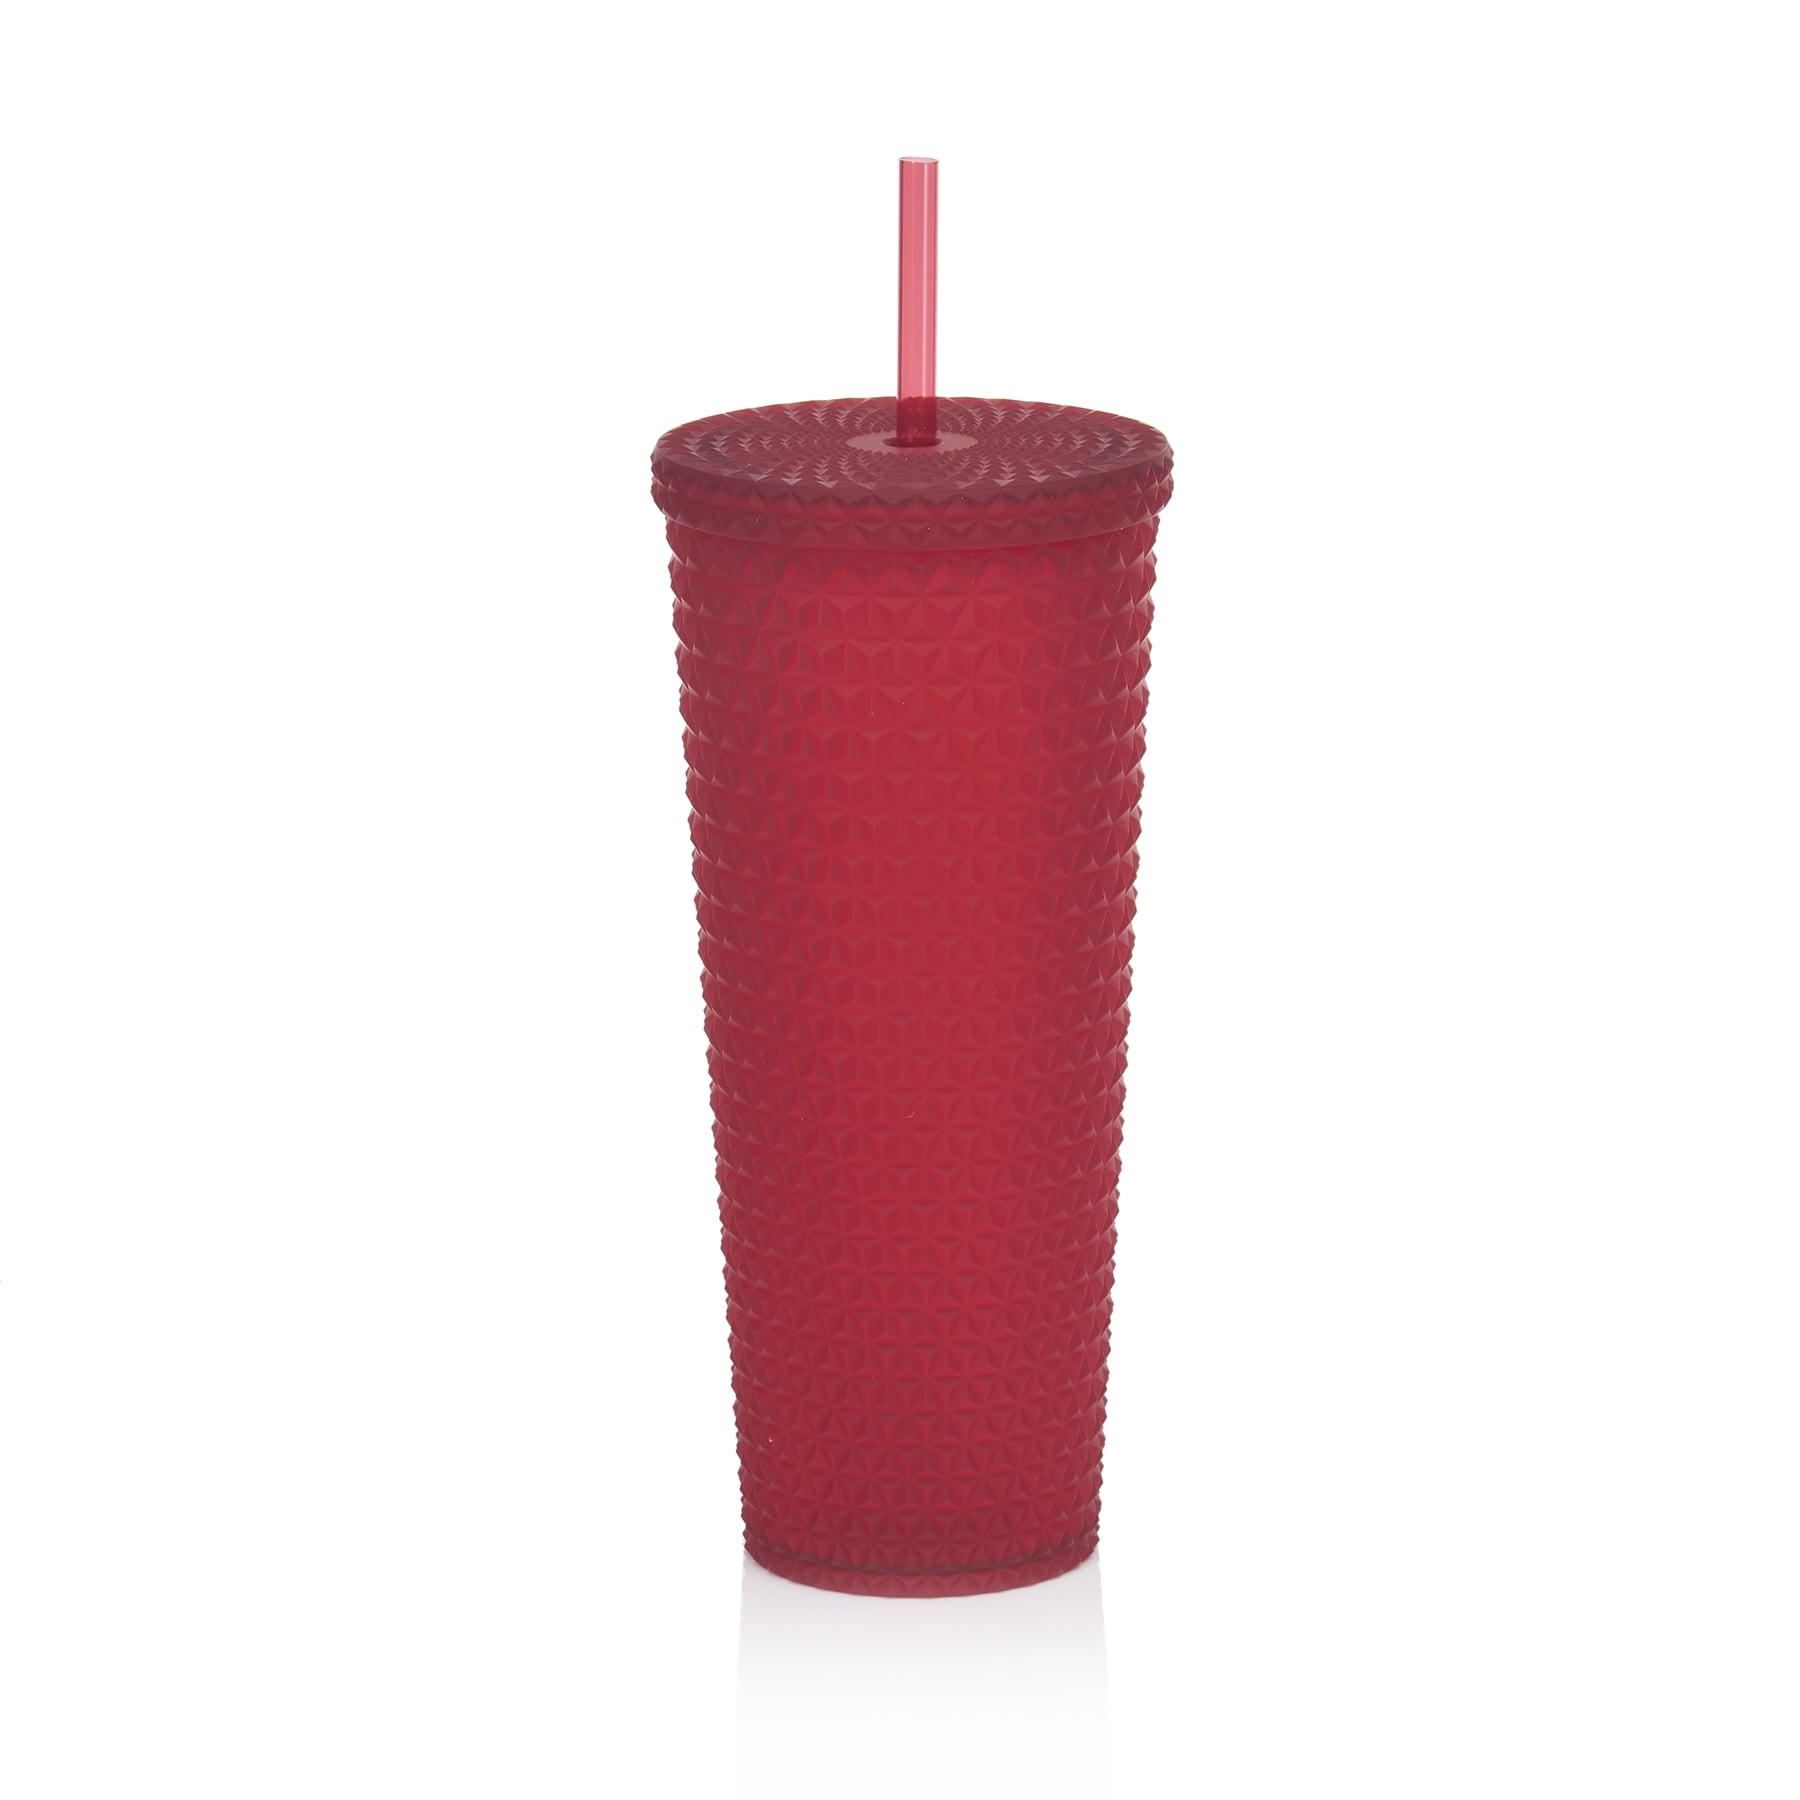 Mainstays 4-Pack Holiday Time Christmas Tumblers with Figural Straw $13.31  (Reg. $24) - $3.33/26 Oz Tumbler - Fabulessly Frugal